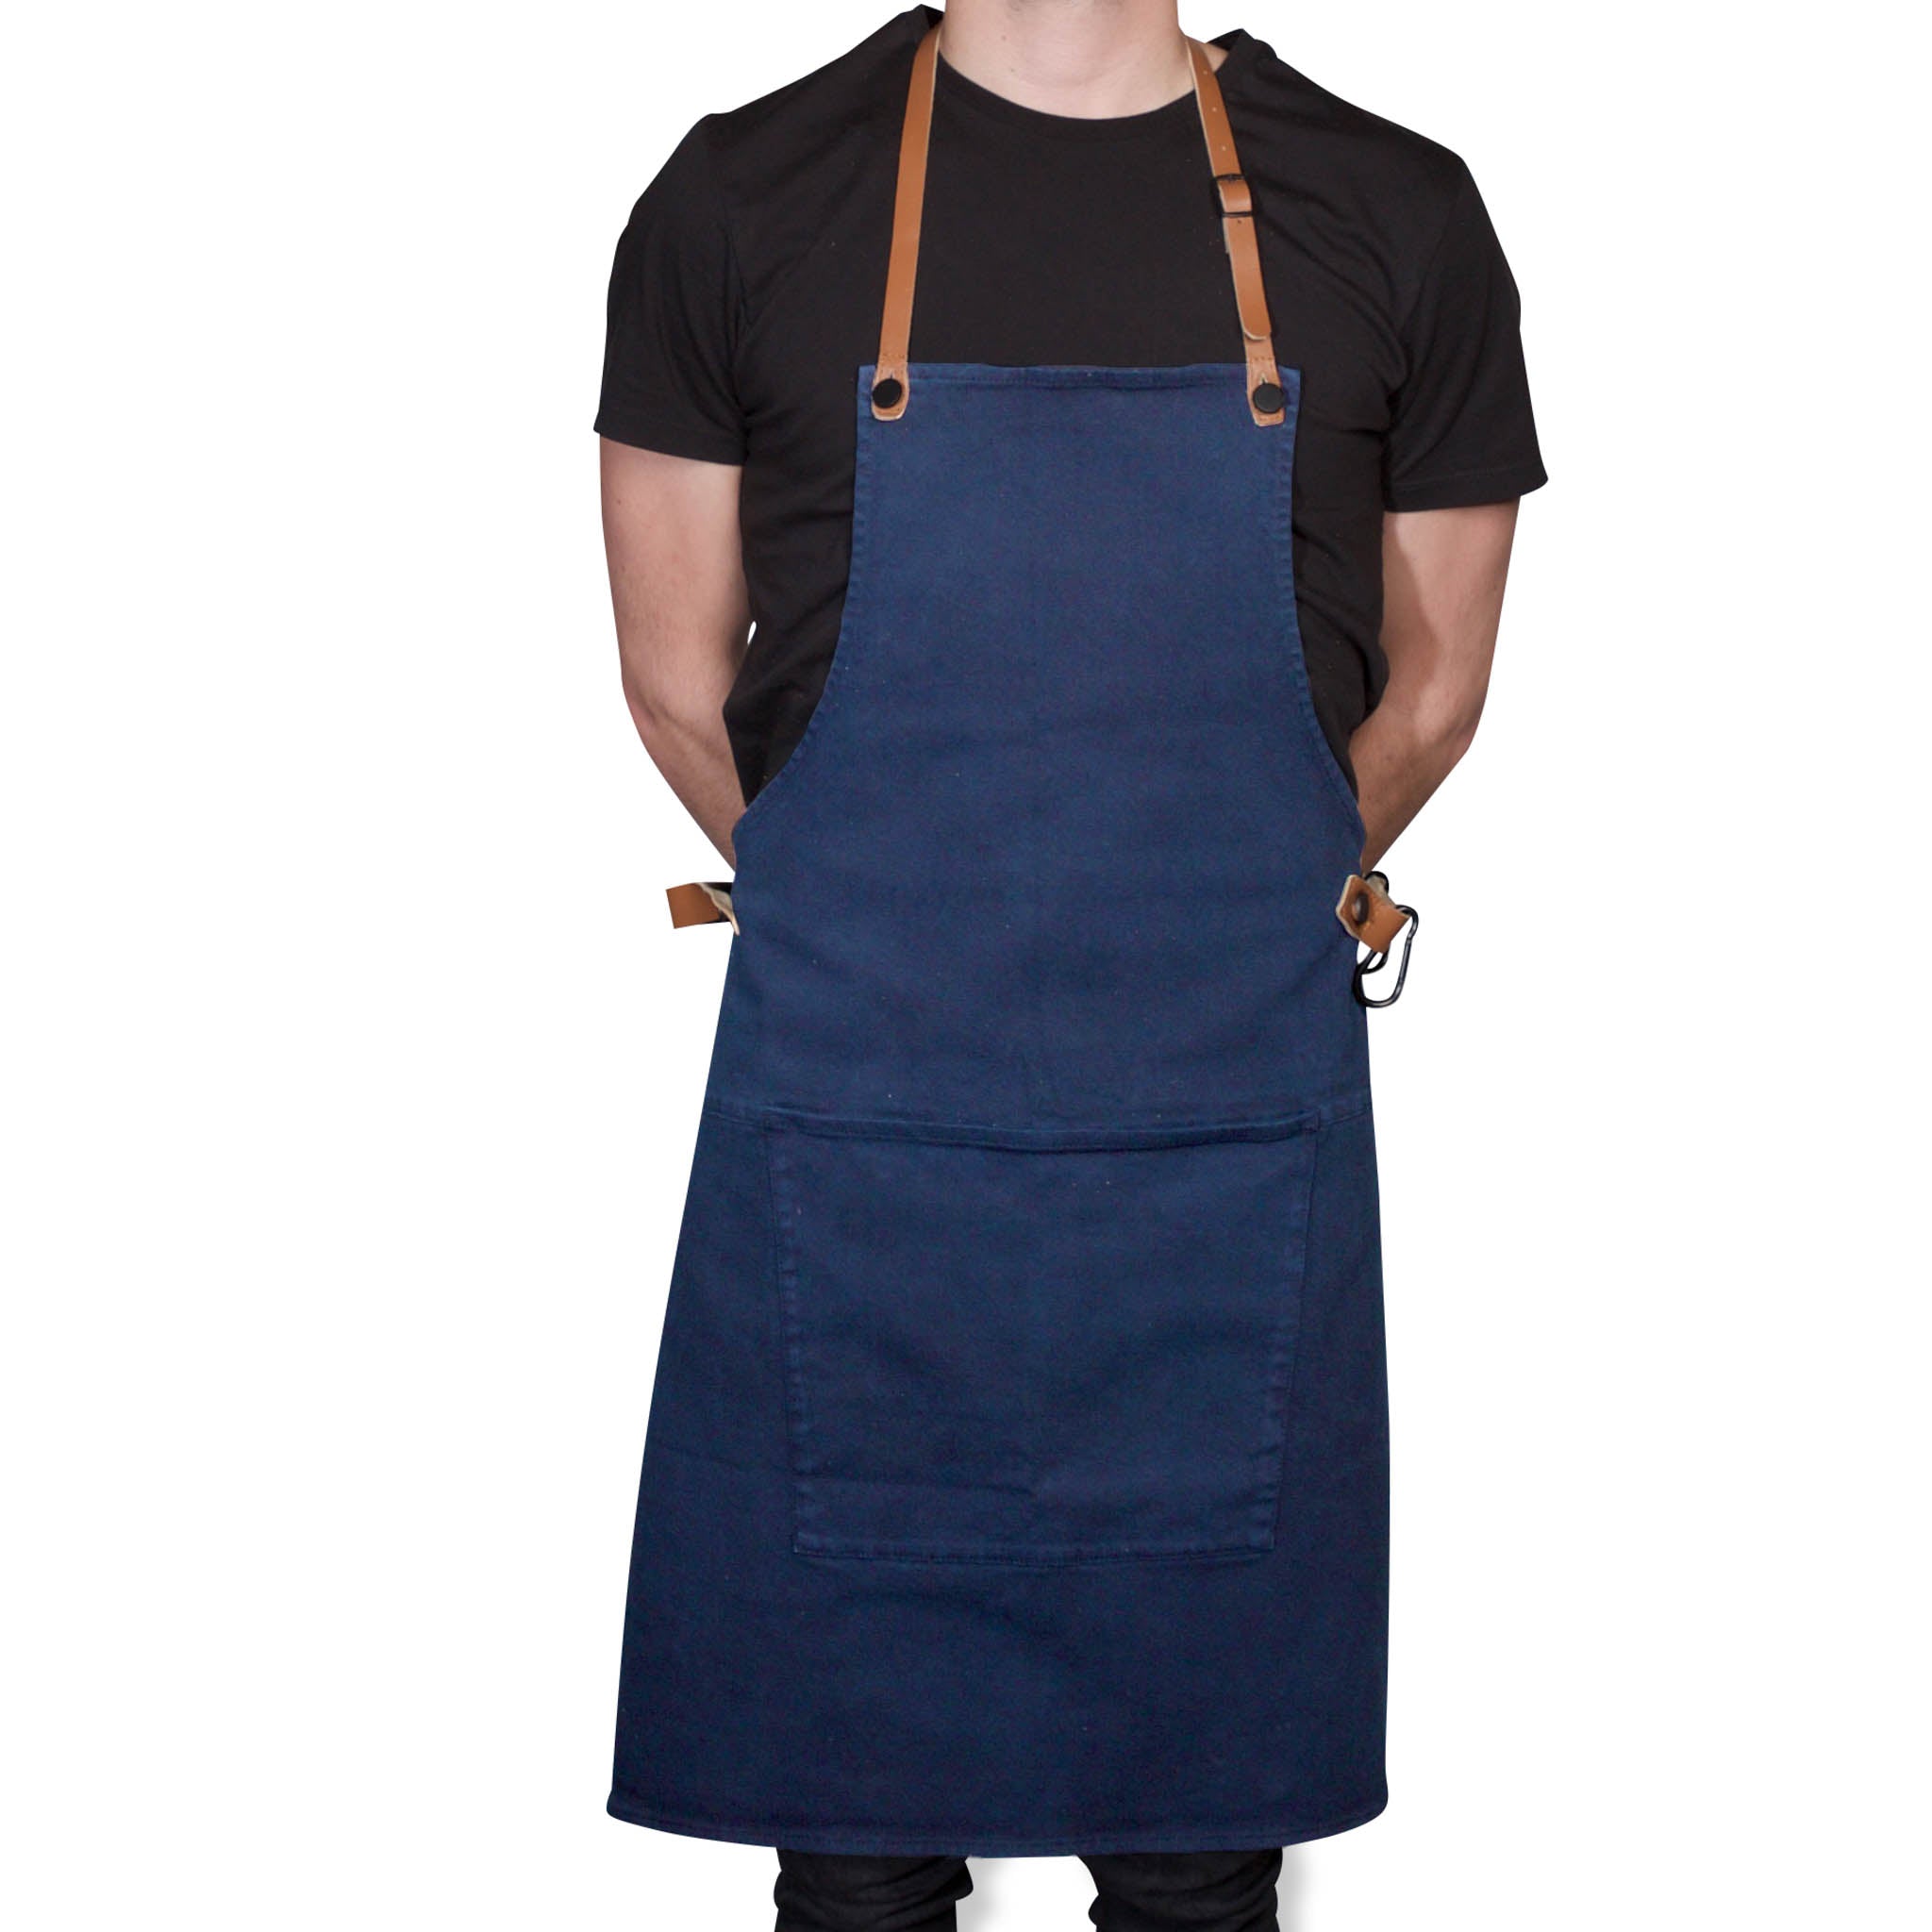 Dutchdeluxes Canvas BBQ Apron in Dark Blue Cookware Kitchen Clothing Model